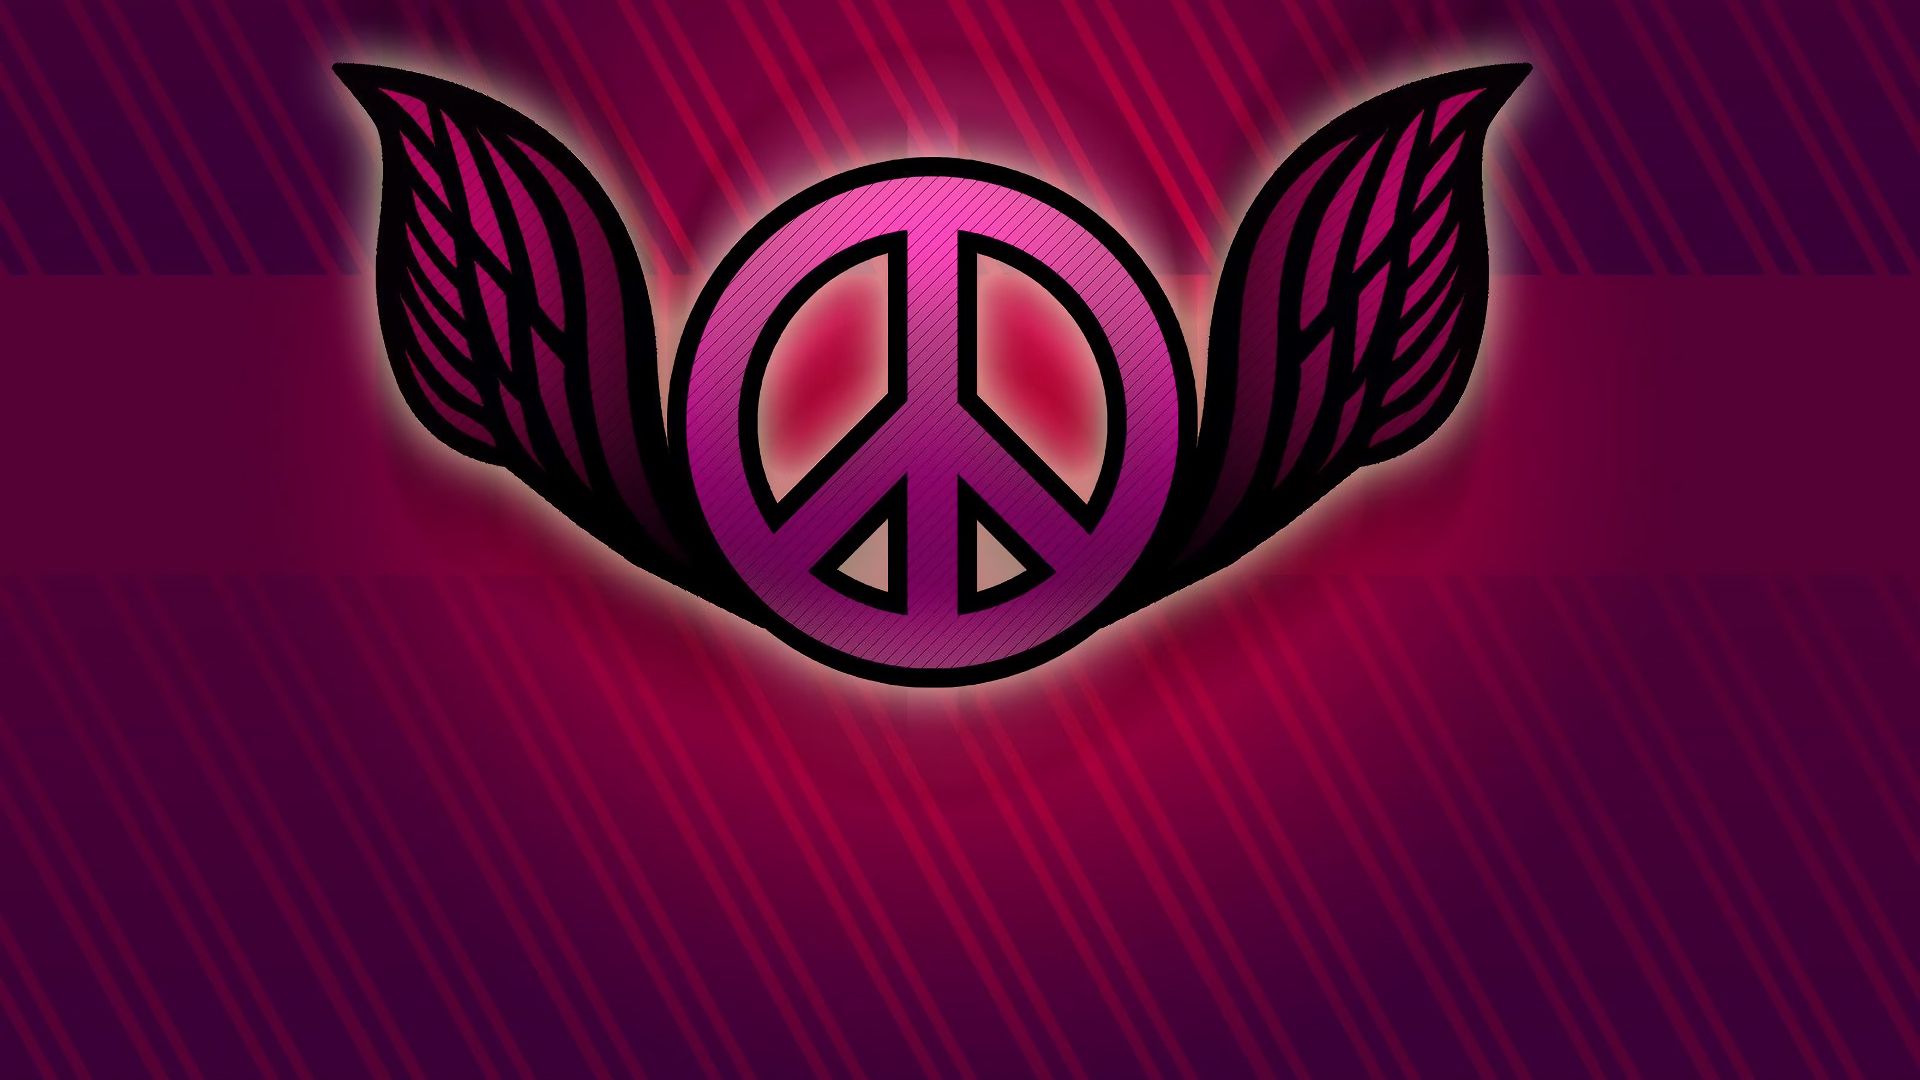 Peace background